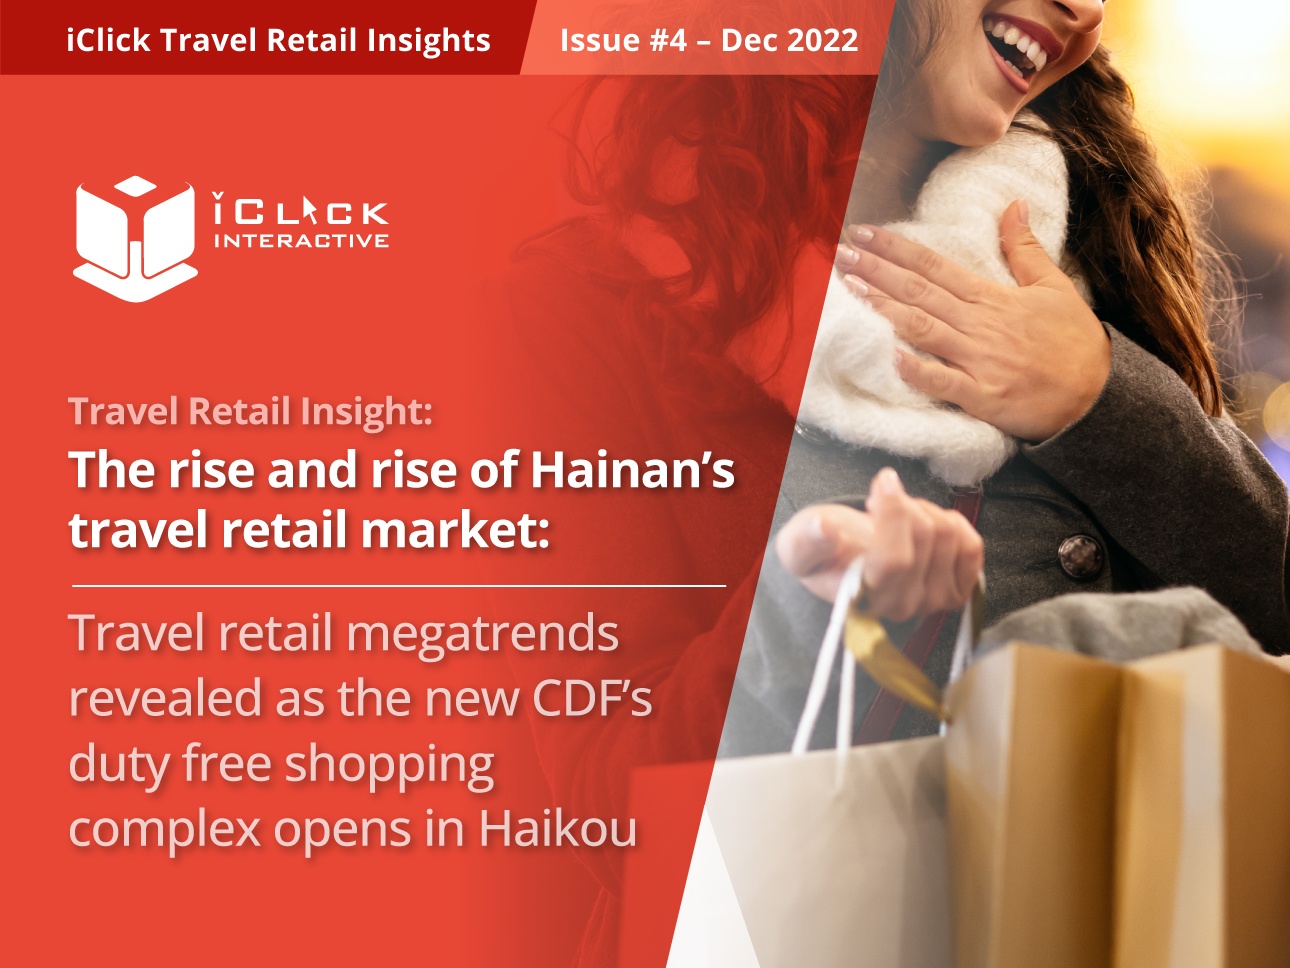 iClick Travel Retail Insights – Issue #4 The rise and rise of Hainan’s travel retail market